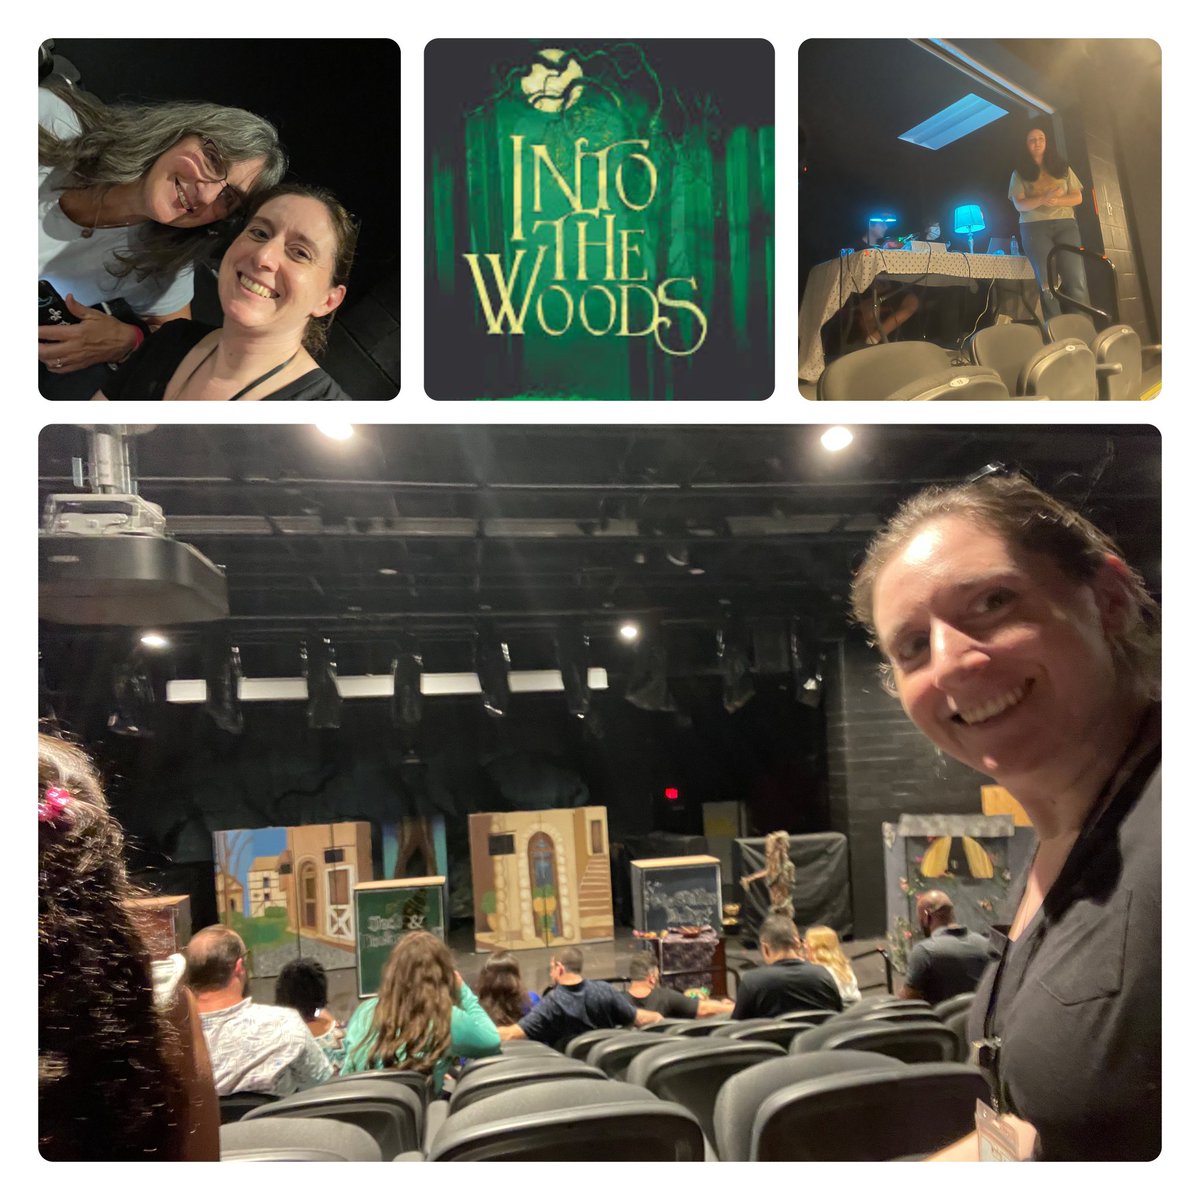 Thanks @jaynebrandon11 for joining me in celebrating @KingwoodMSDrama & @KingwoodMSChoir !! What a great show!!! #IntotheWoods @HumbleISD_KMS @counselors_kms @HumbleISD_PSS